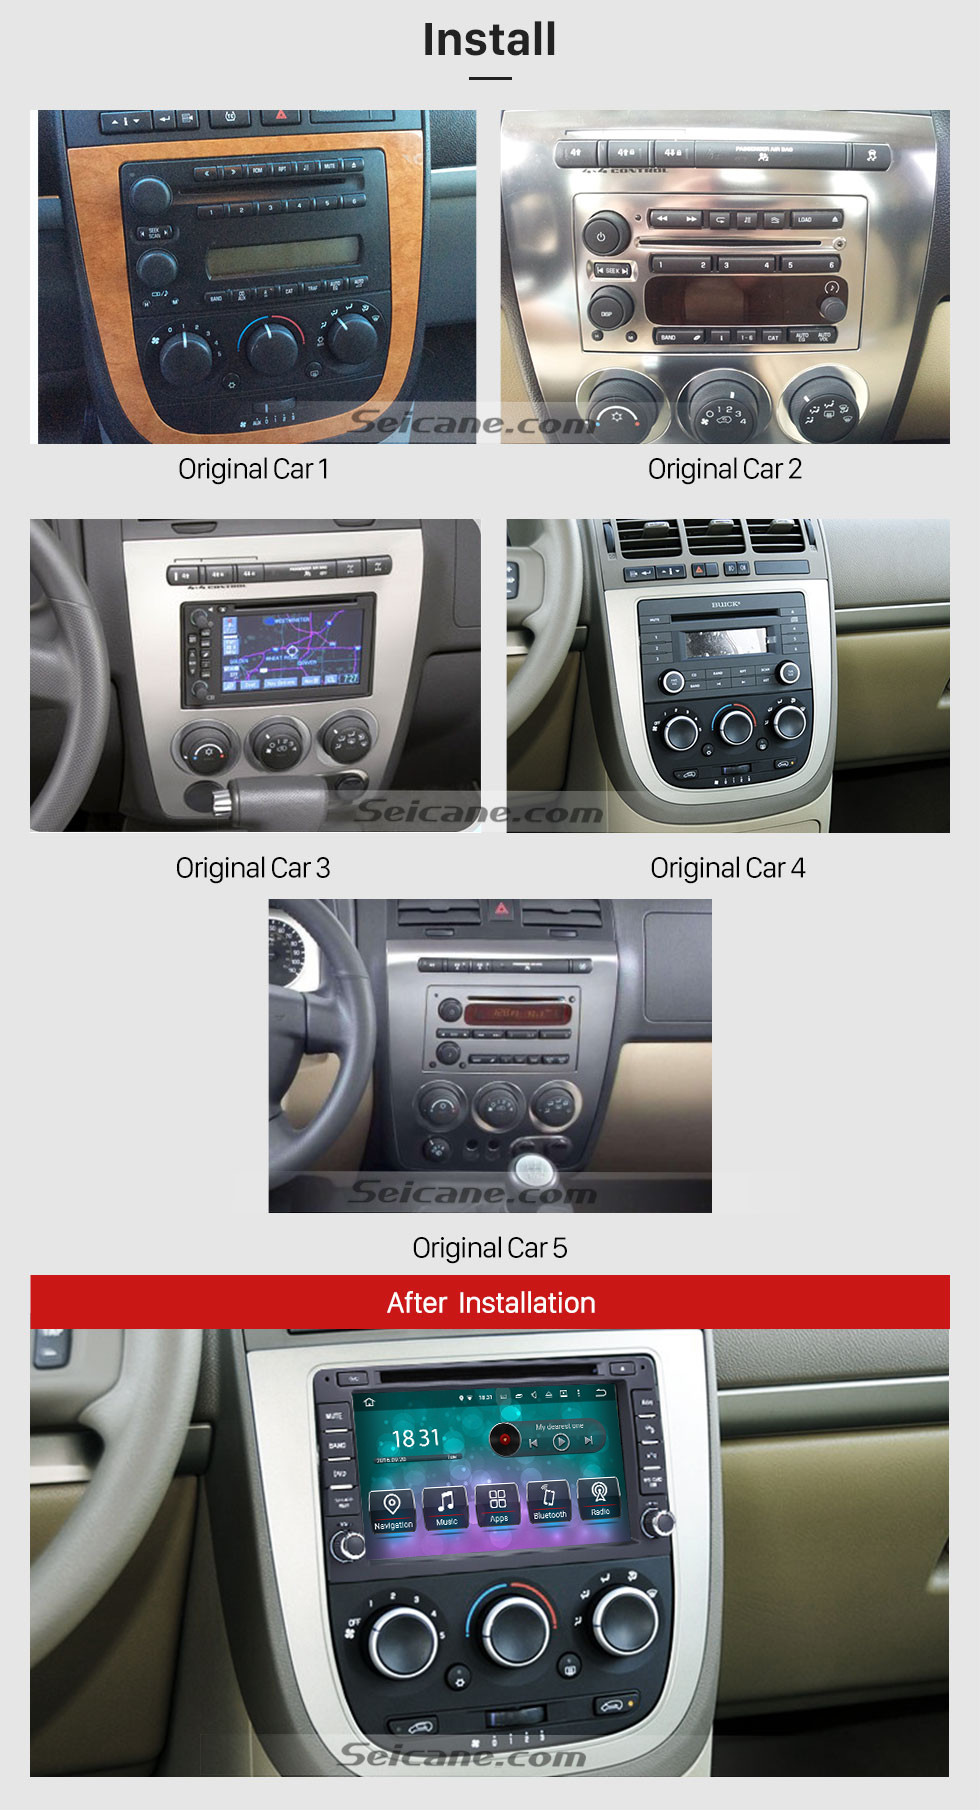 Seicane Android 10.0 Radio GPS Navigation system 2005 2006 2007 Buick Terraza with DVD Player HD Touch Screen Bluetooth WiFi TV Steering Wheel Contro 1080P Backup Camera